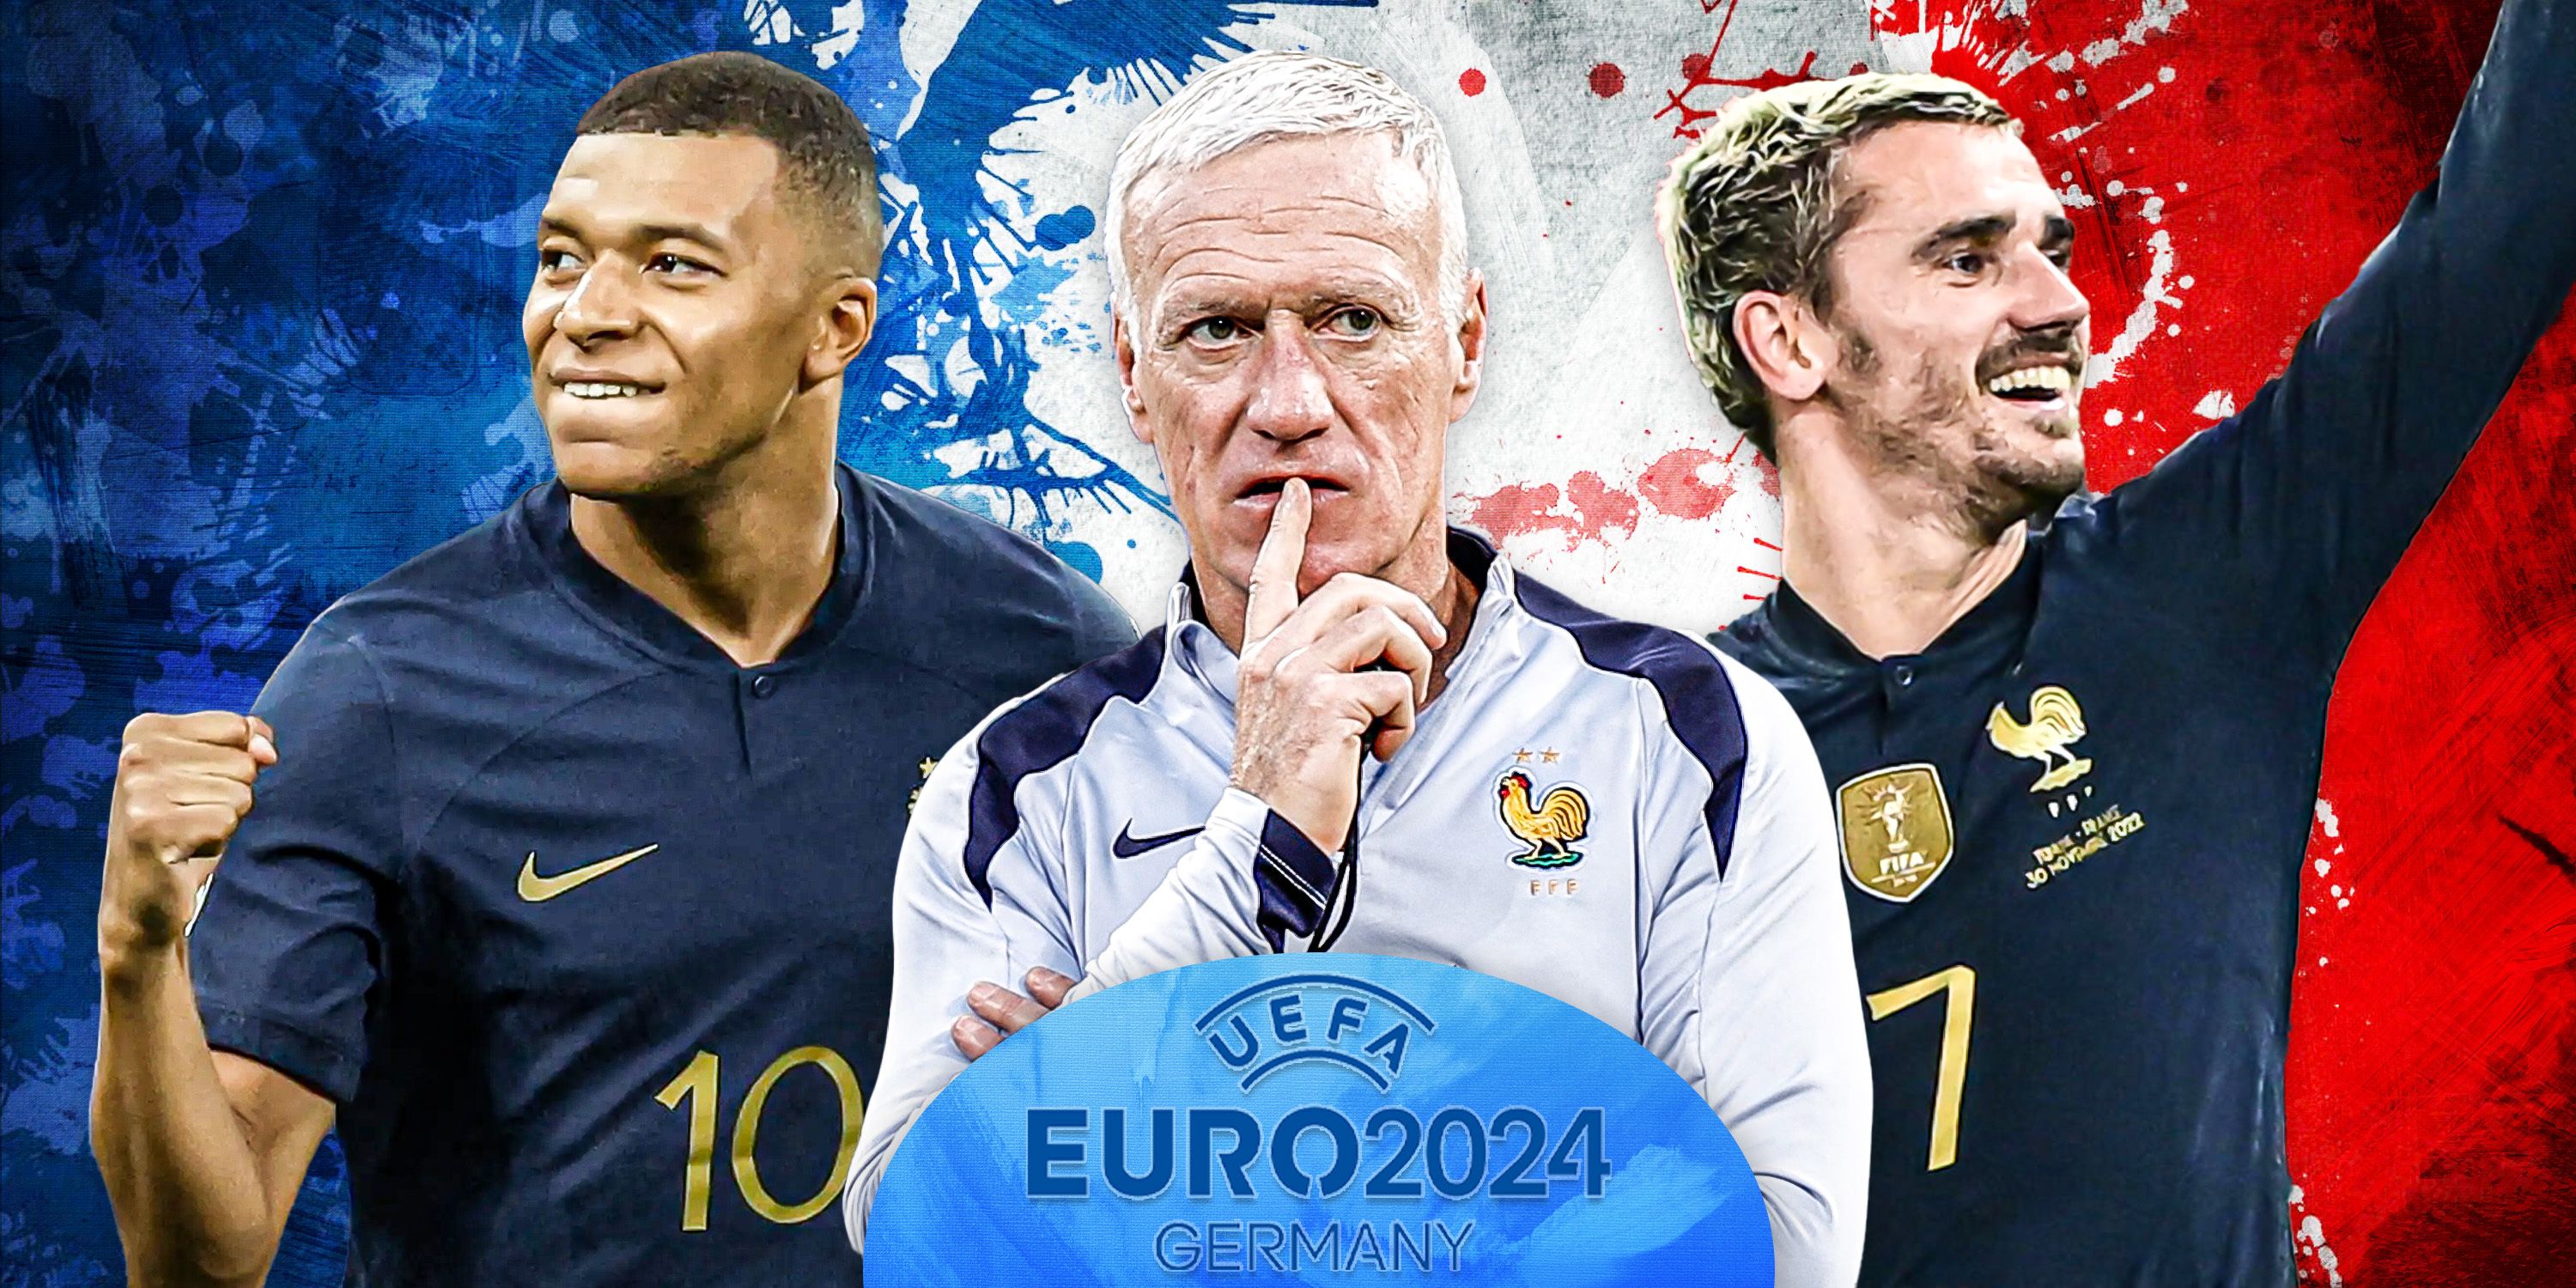 EPL_France stacked Euro 2024